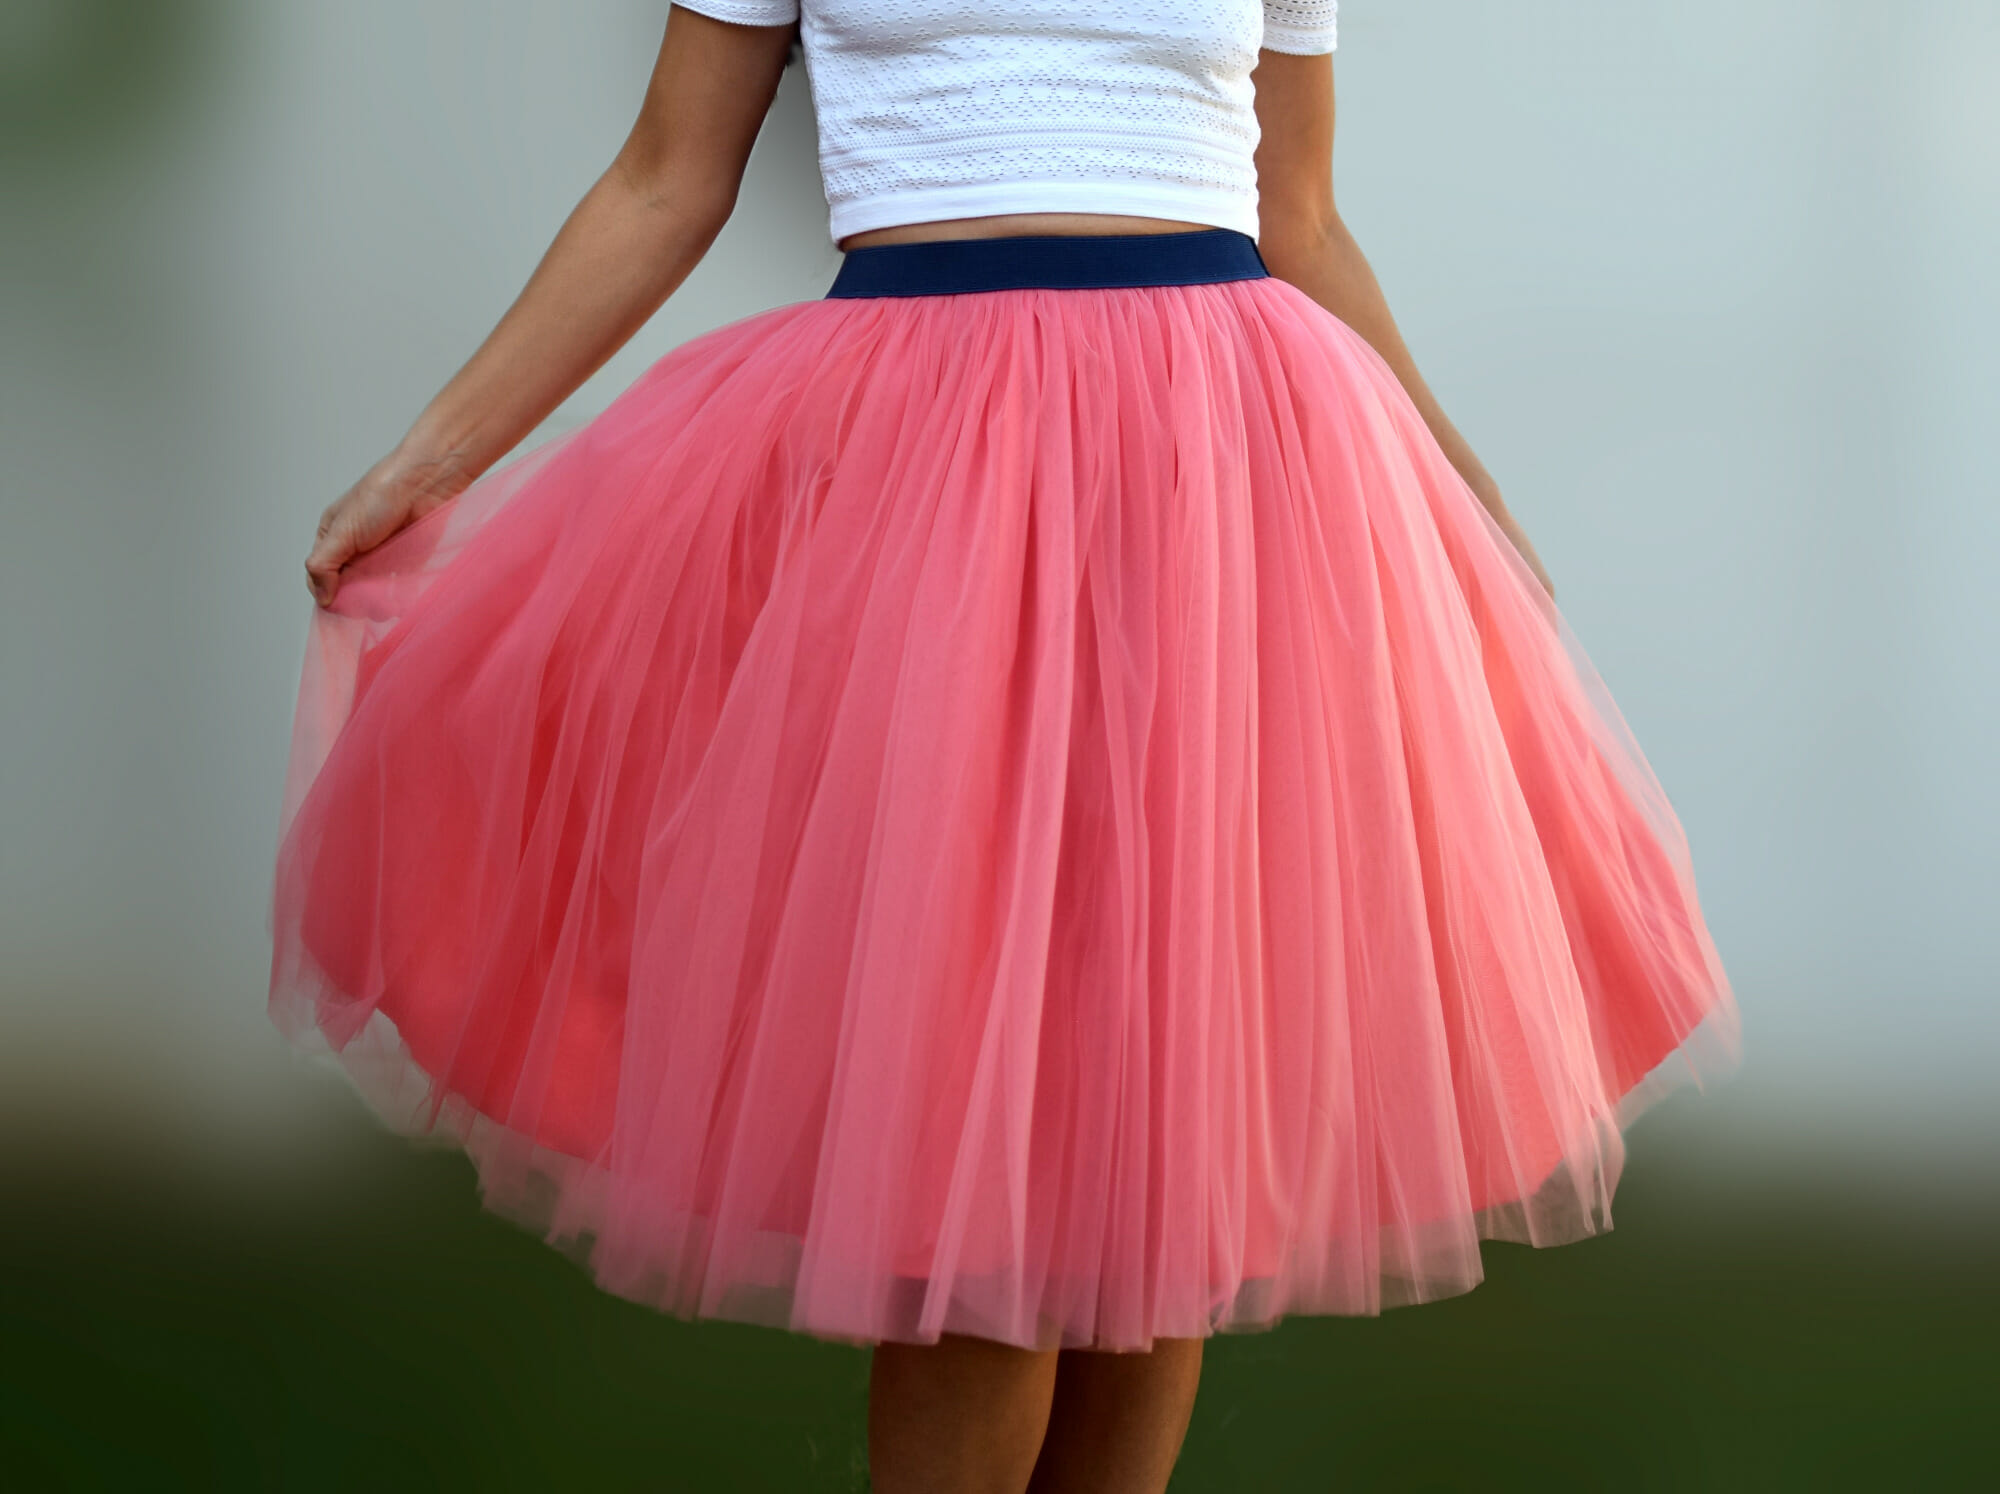 Girls Classic Elastic Layered Tutus Dress Up Tulle Skirt 9 months-10 Years 